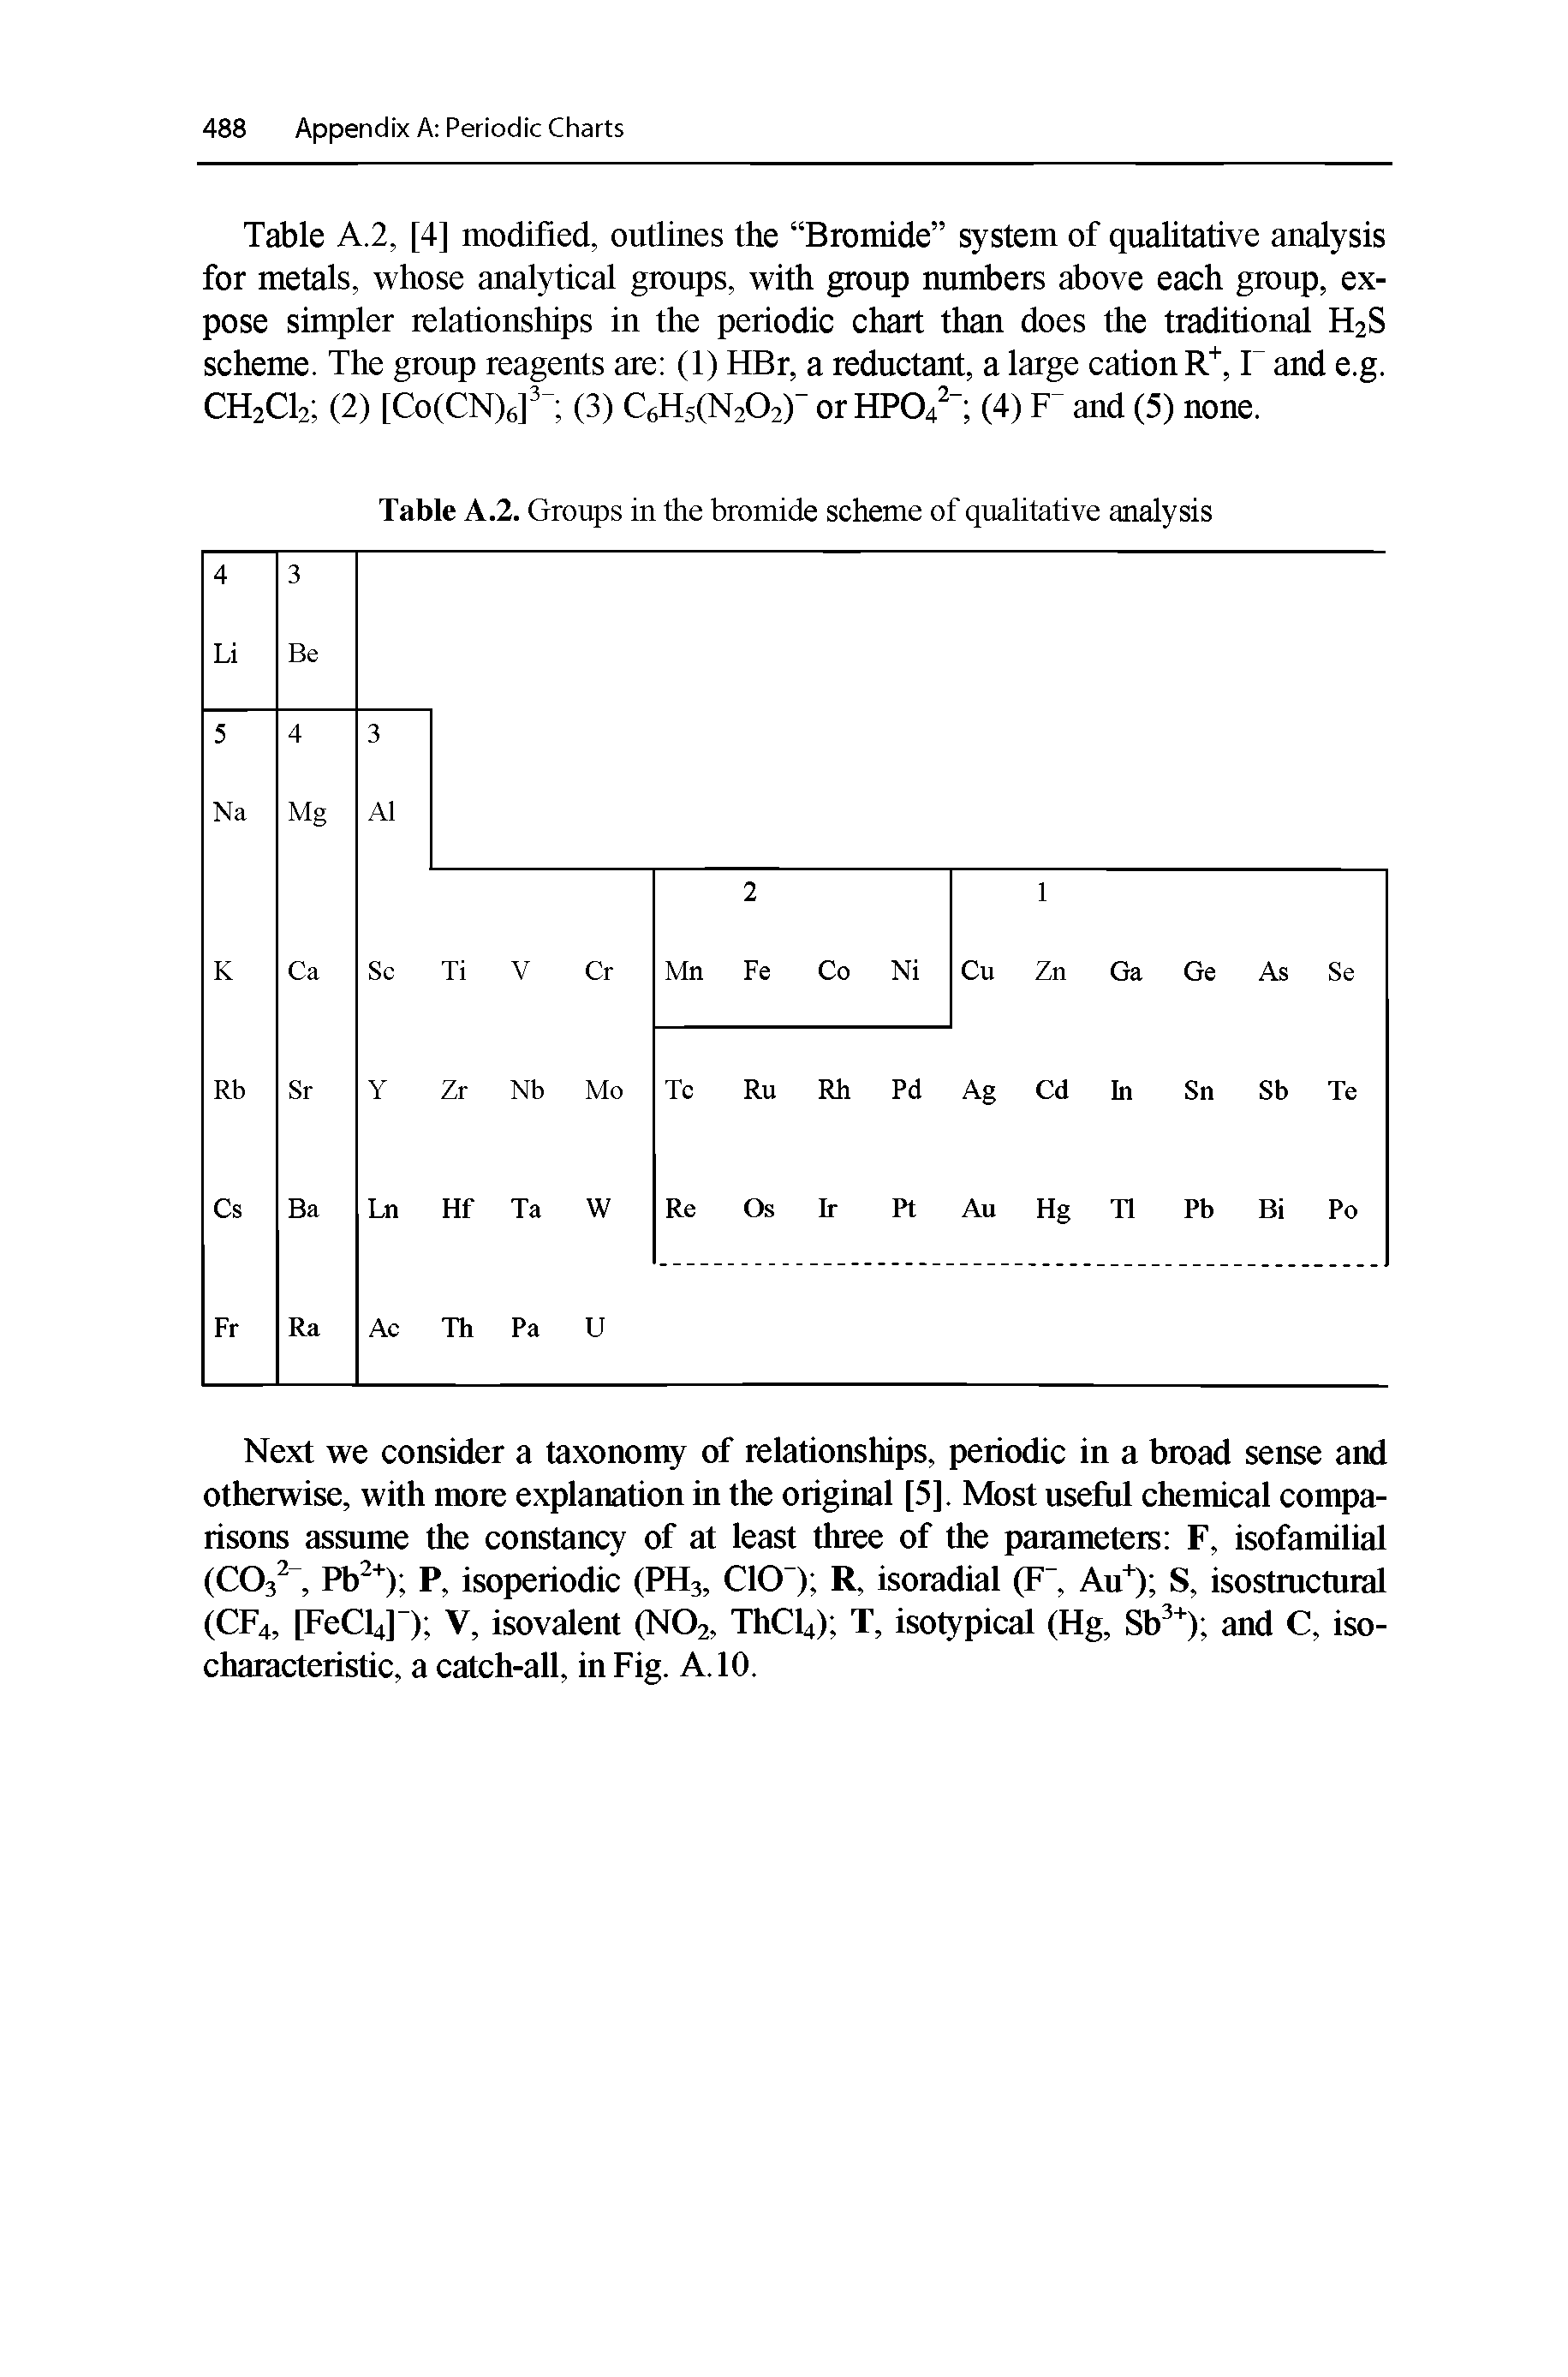 Table A.2, [4] modified, outlines the Bromide system of qualitative analysis for metals, whose analytical groups, with group numbers above each group, expose simpler relationships in the periodic chart than does the traditional H2S scheme. The group reagents are (1) HBr, a reductant, a large cation R", T and e.g. CH2CI2 (2) [Co(CN)6] (3) C6Hs(N202) orHP04 " (4) and (5) none.